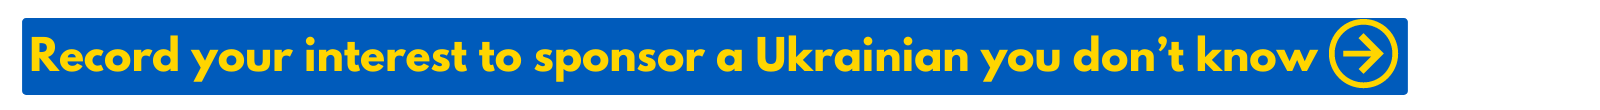 Record your interest to sponsor a Ukrainian you don’t know